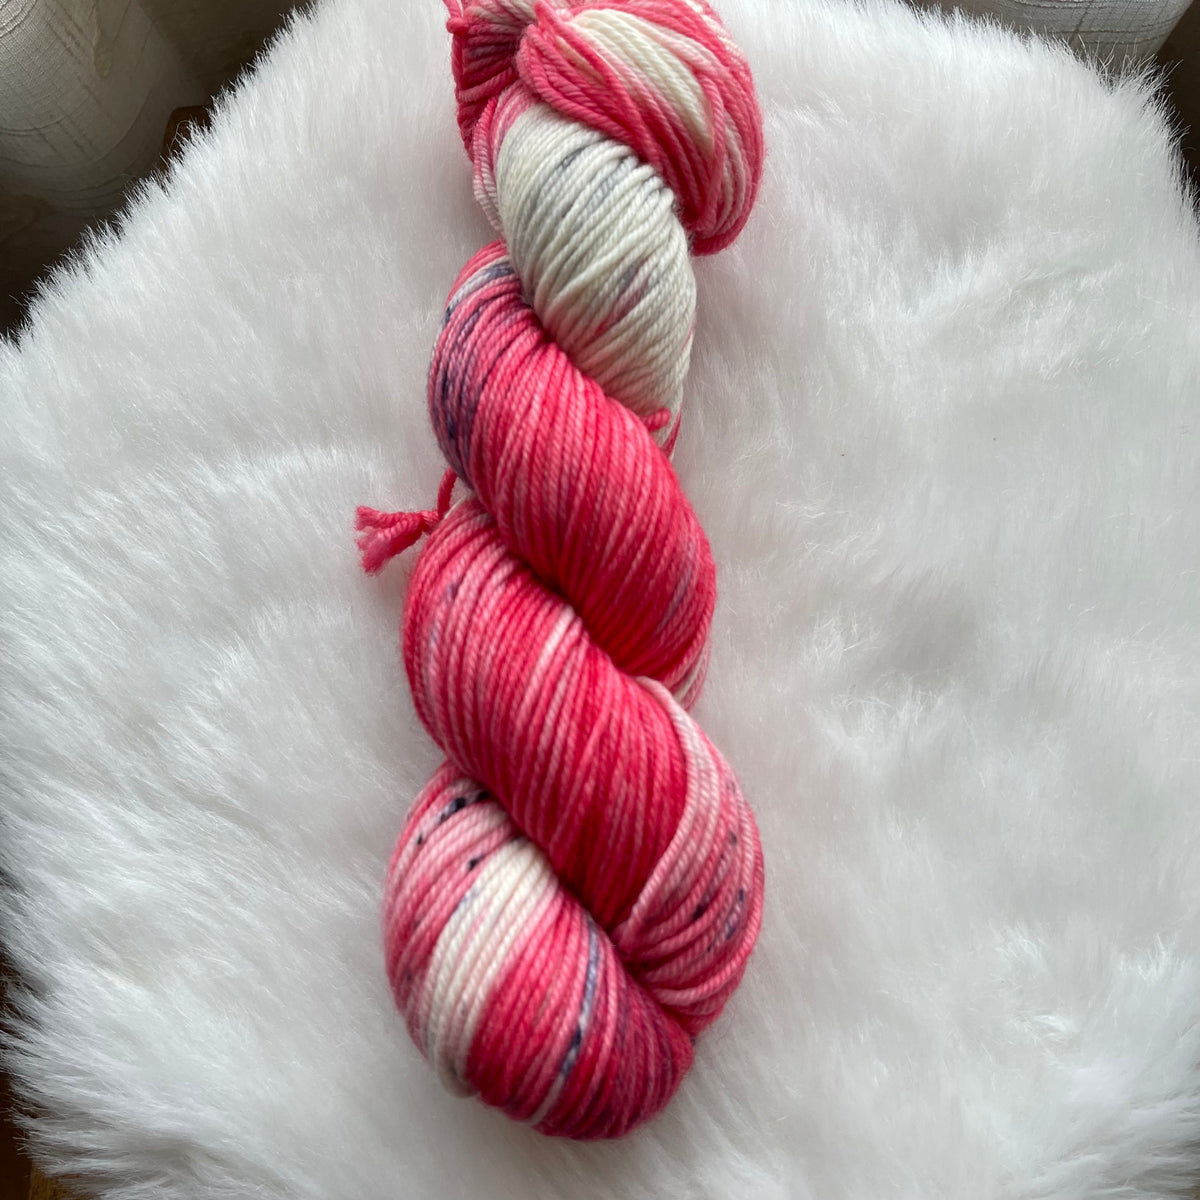 FREE ENERGY  -Ready to Ship - Super DK- Hand Dyed Yarn Skein